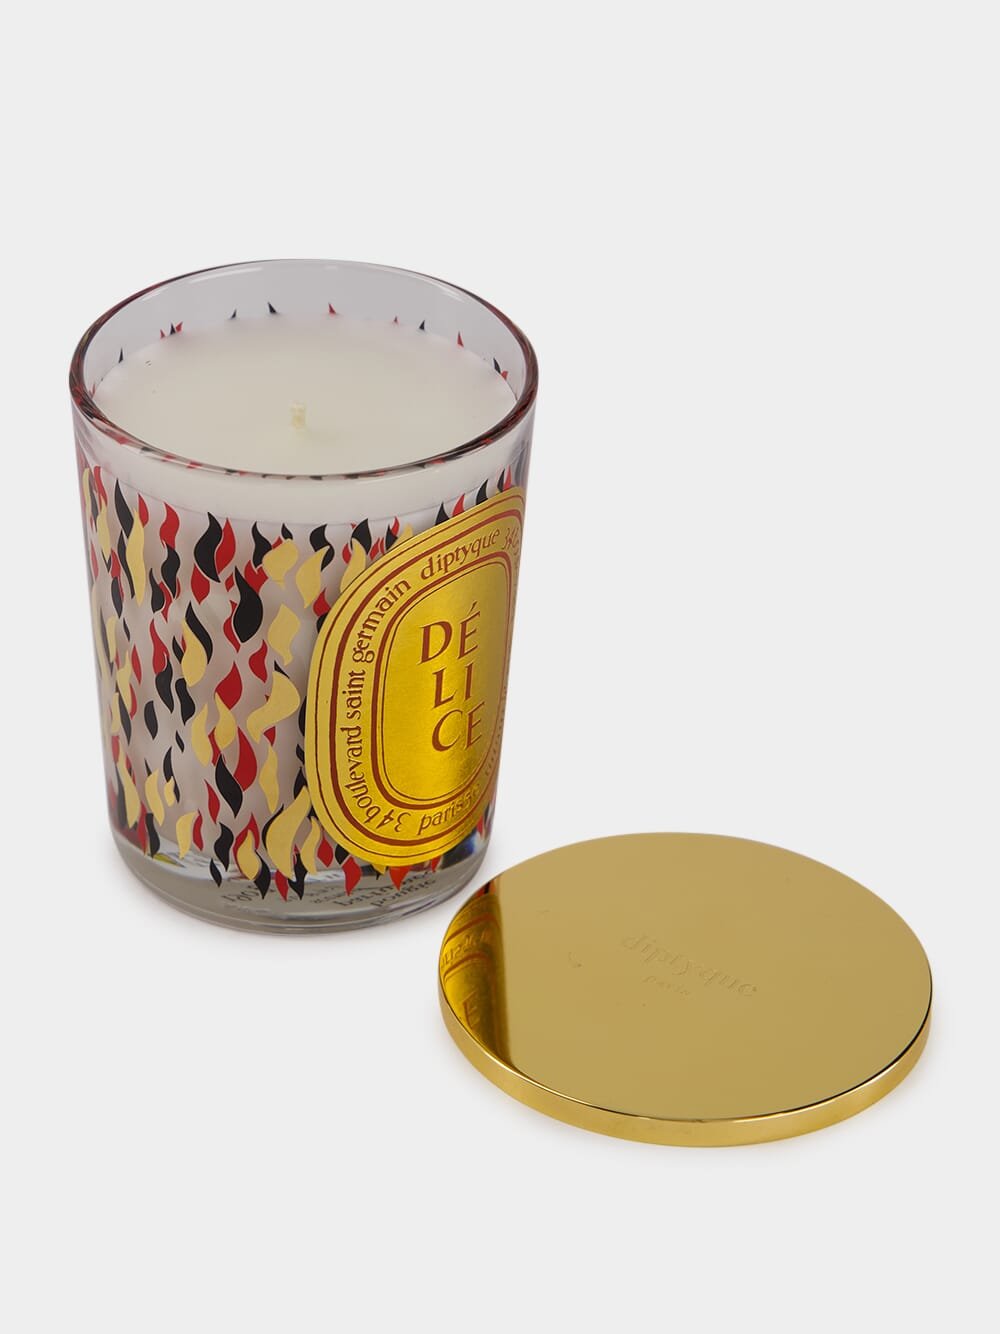 DiptyqueDélice Classic Candle 190g at Fashion Clinic